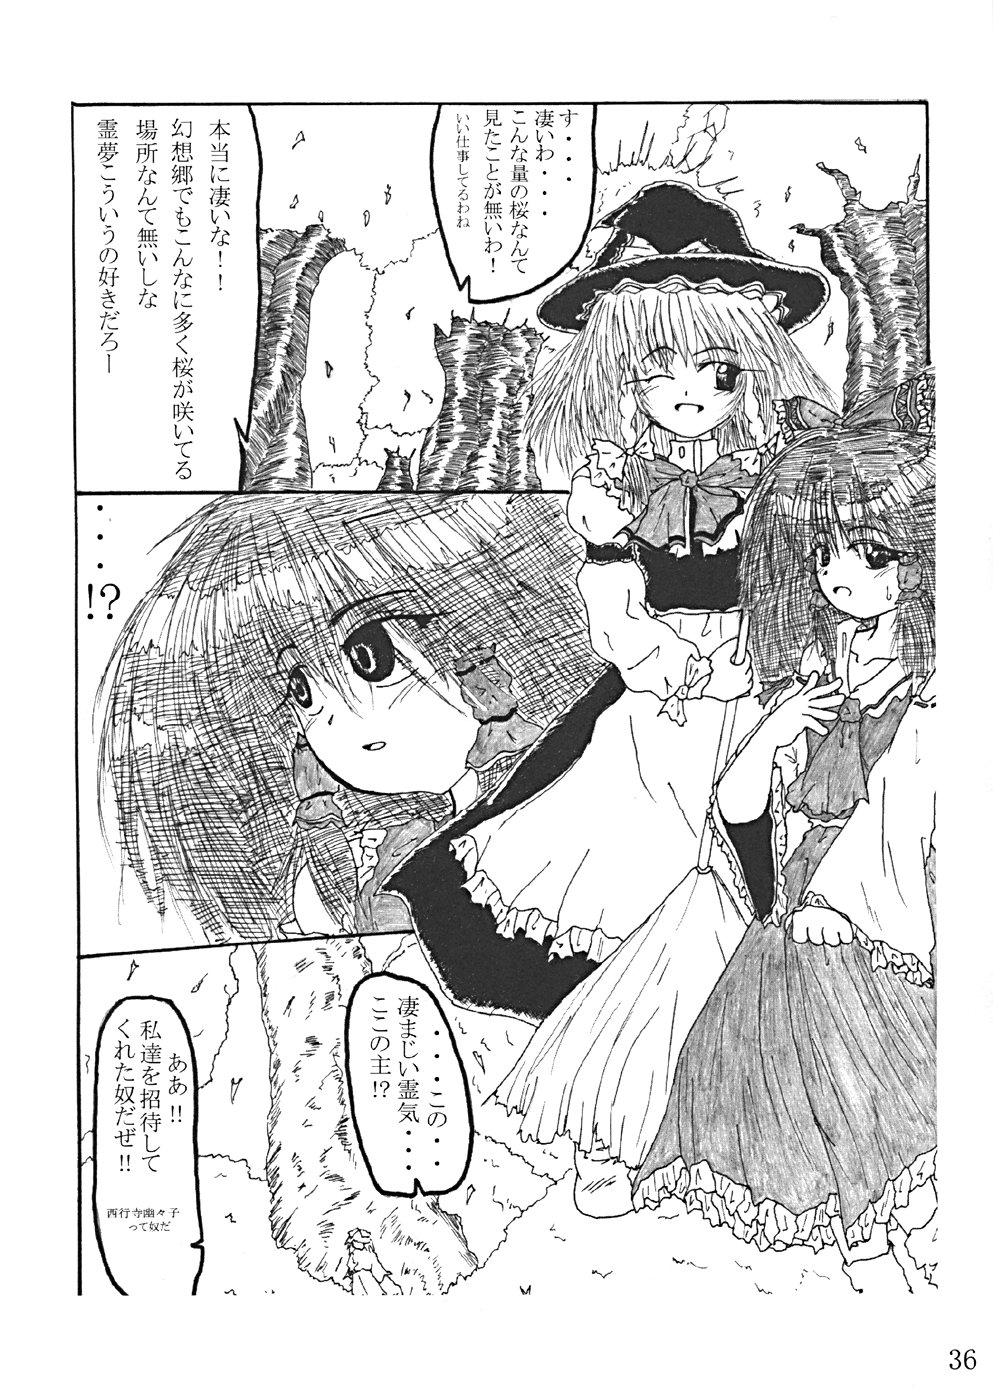 (CR35) [LemonMaiden (Various)] Oukasai ～ Cherry Point MAX (Touhou Project) page 39 full